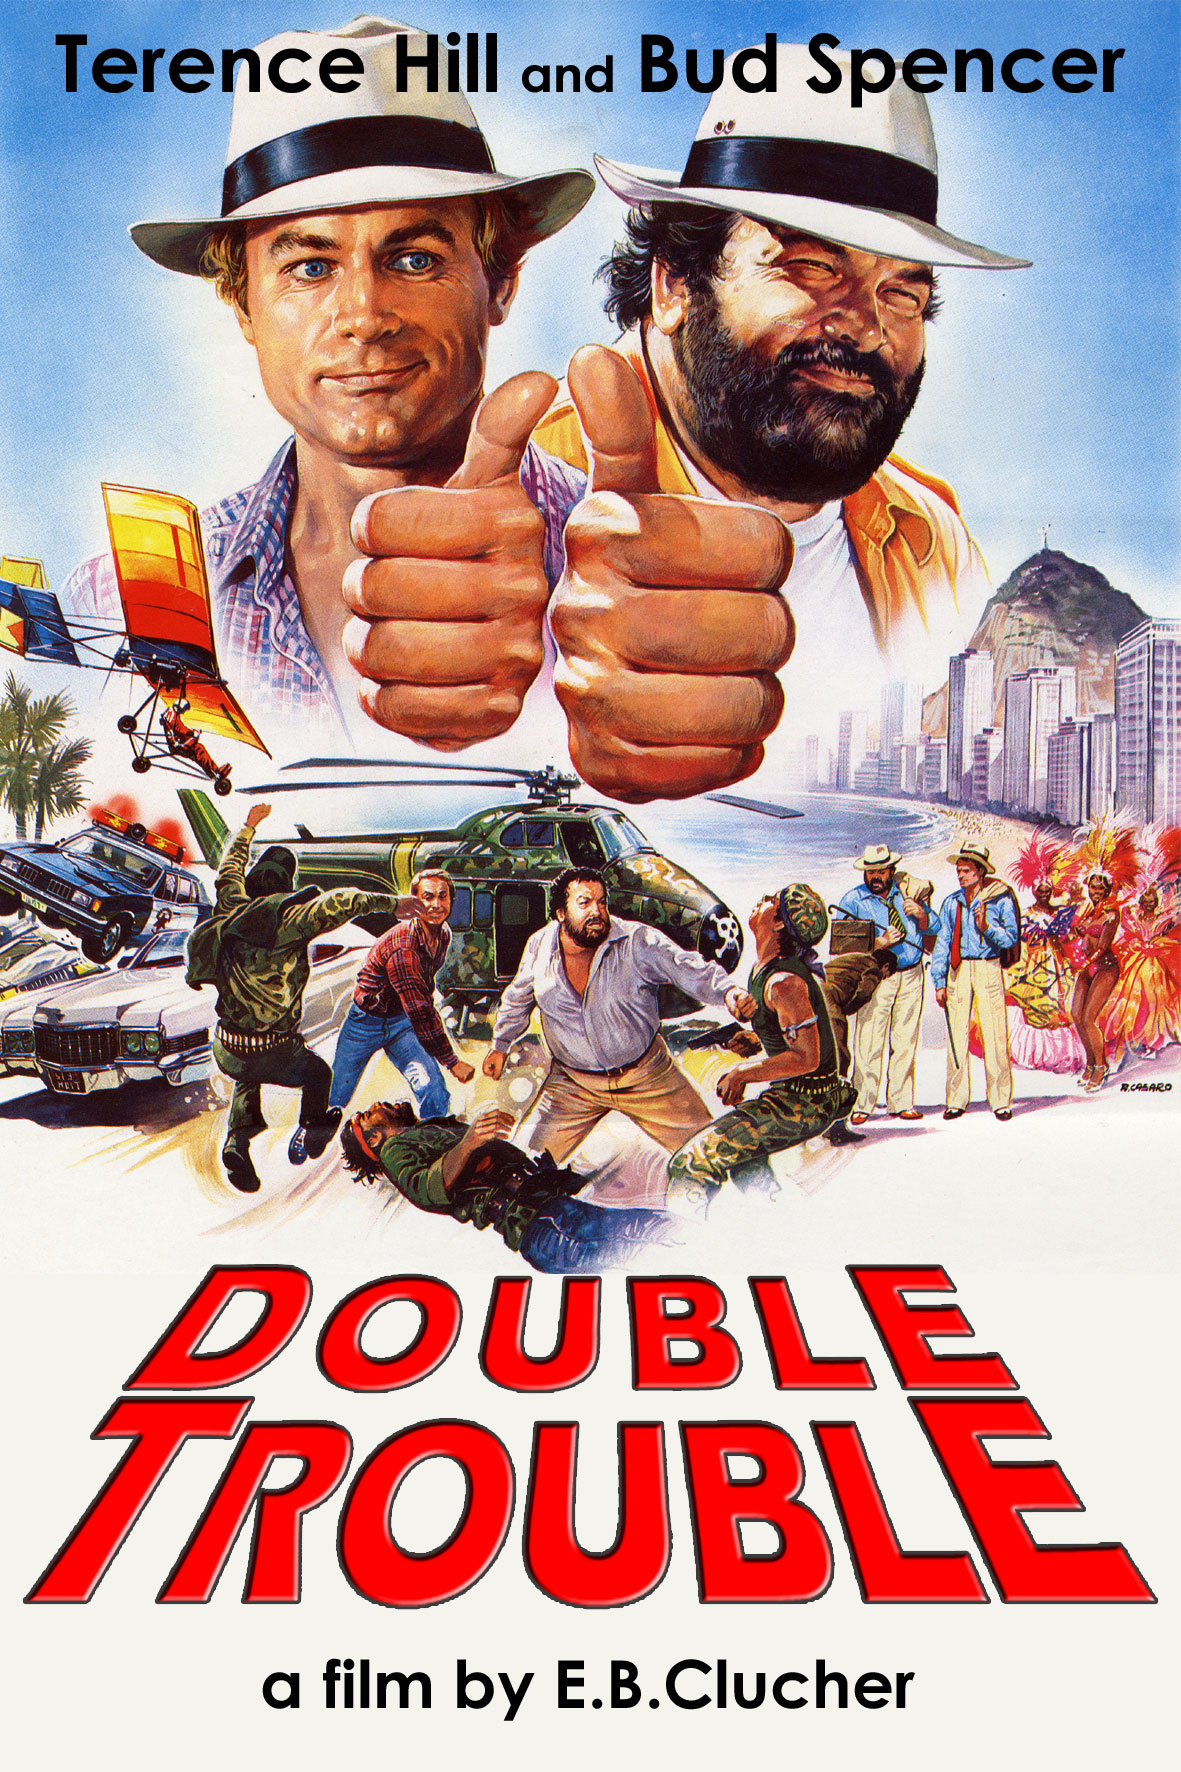 BUD SPENCER & TERENCE HILL COLLECTION - FILMEXPORT